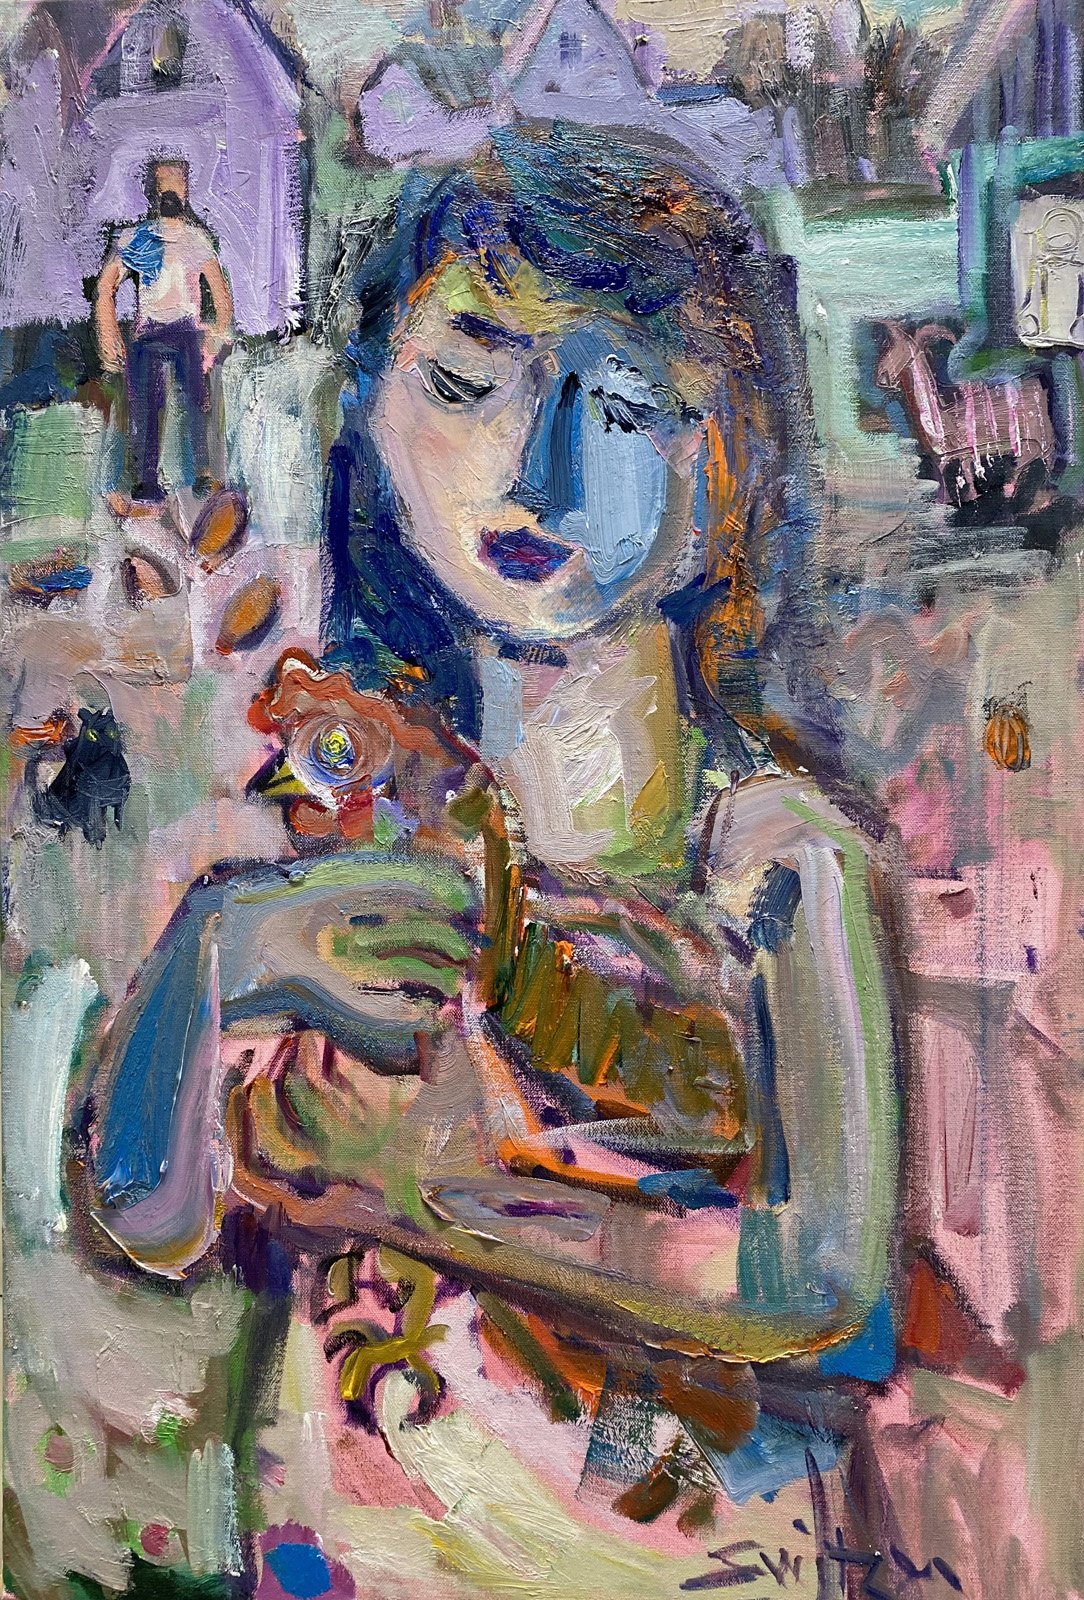  “Pink Girl, Blue Goat,”                                                             36x24 inches,                                                                                  oil on canvas                                                         